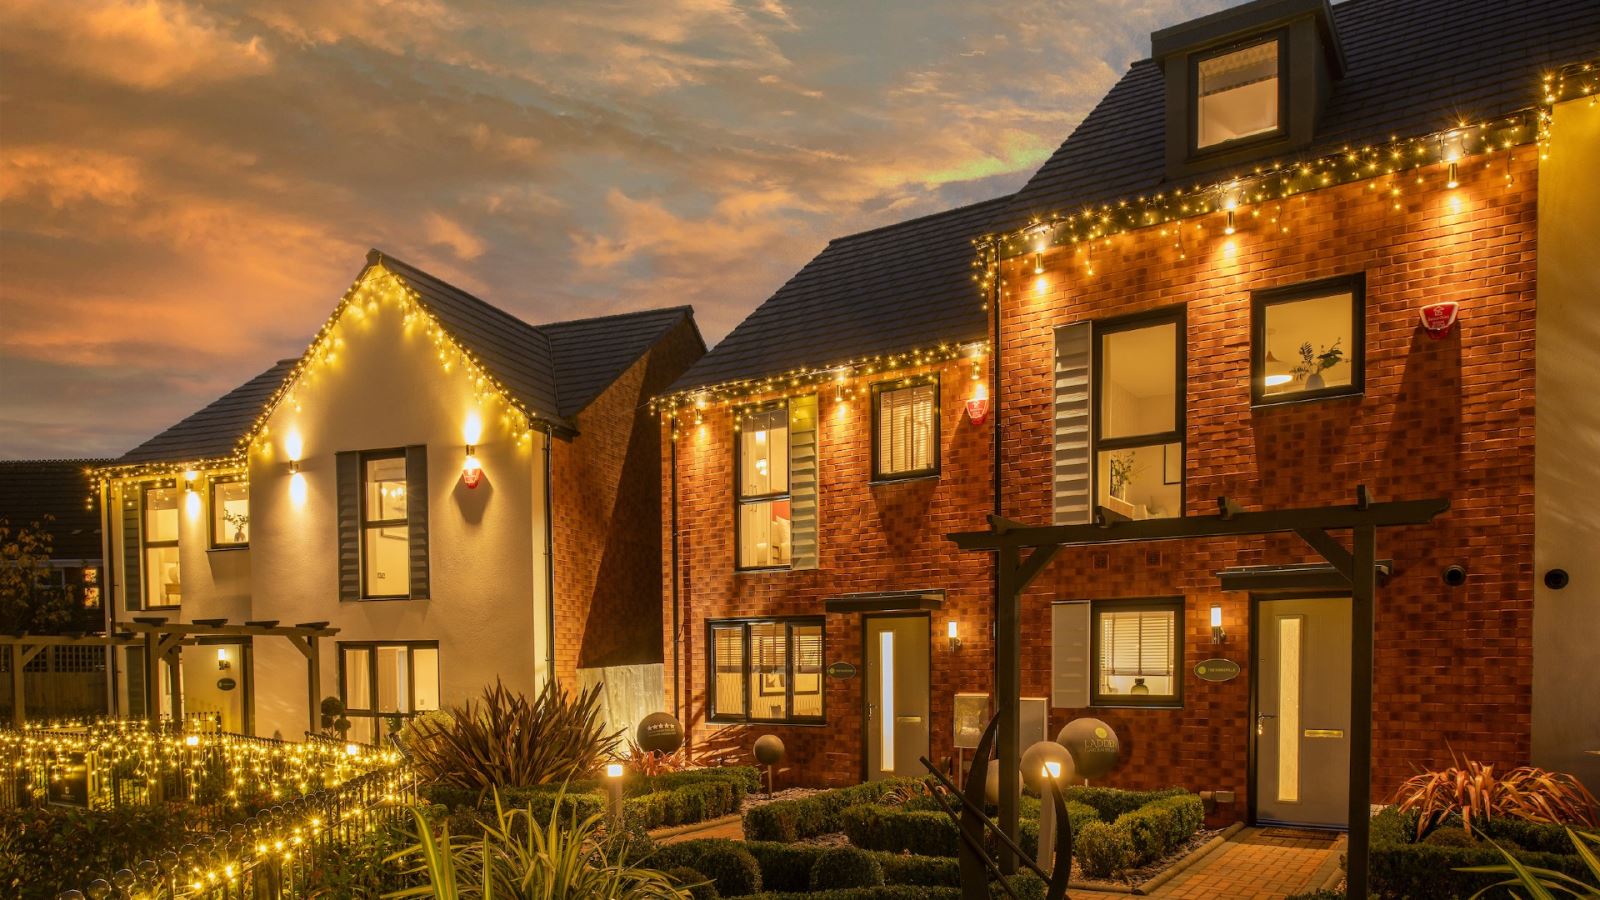 Ladden Garden Village sales centres and show homes at Christmas